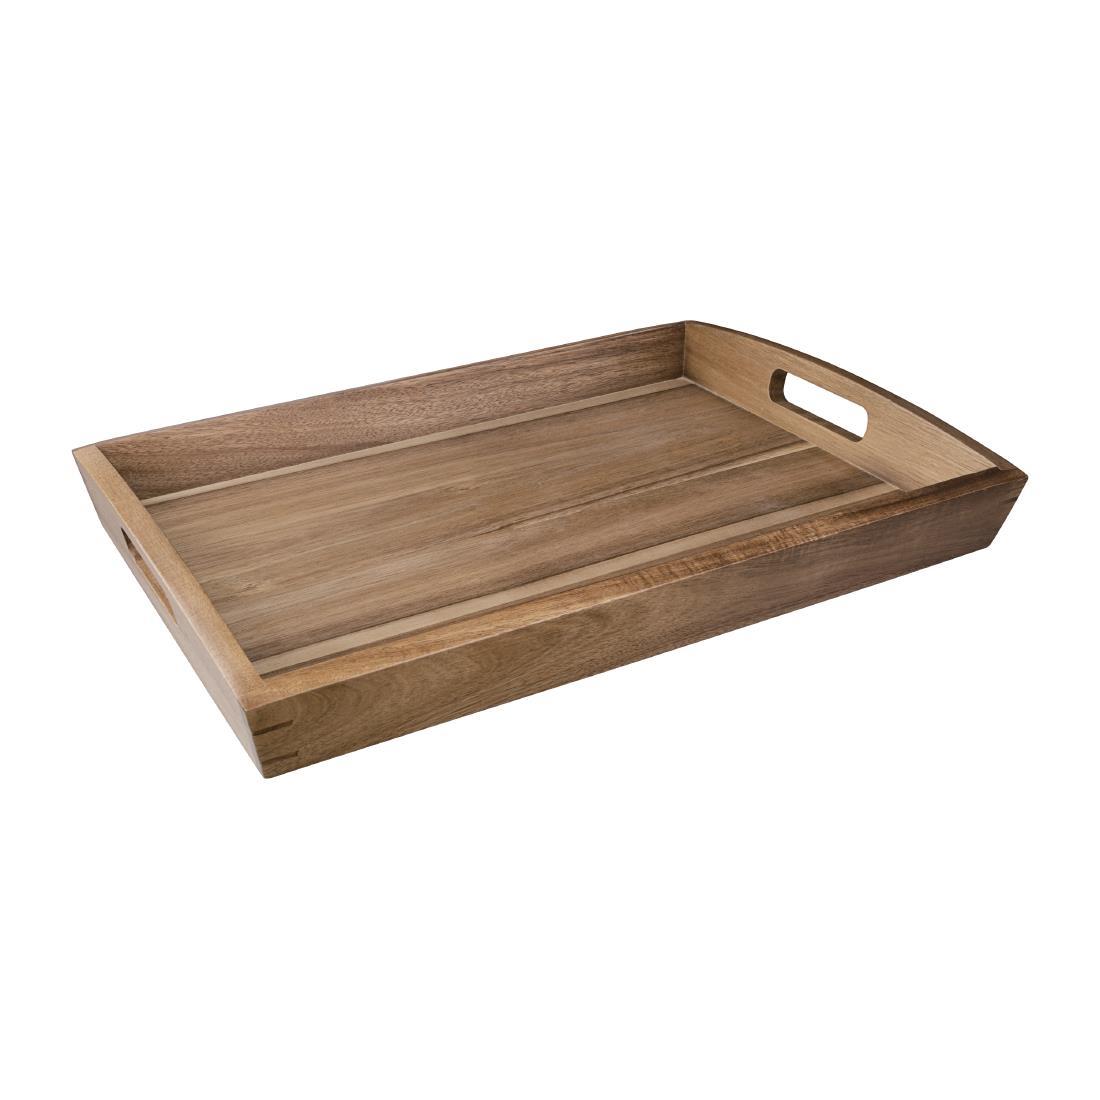 Olympia Large Acacia Wood Butler Tray 510mm - GM266  - 1